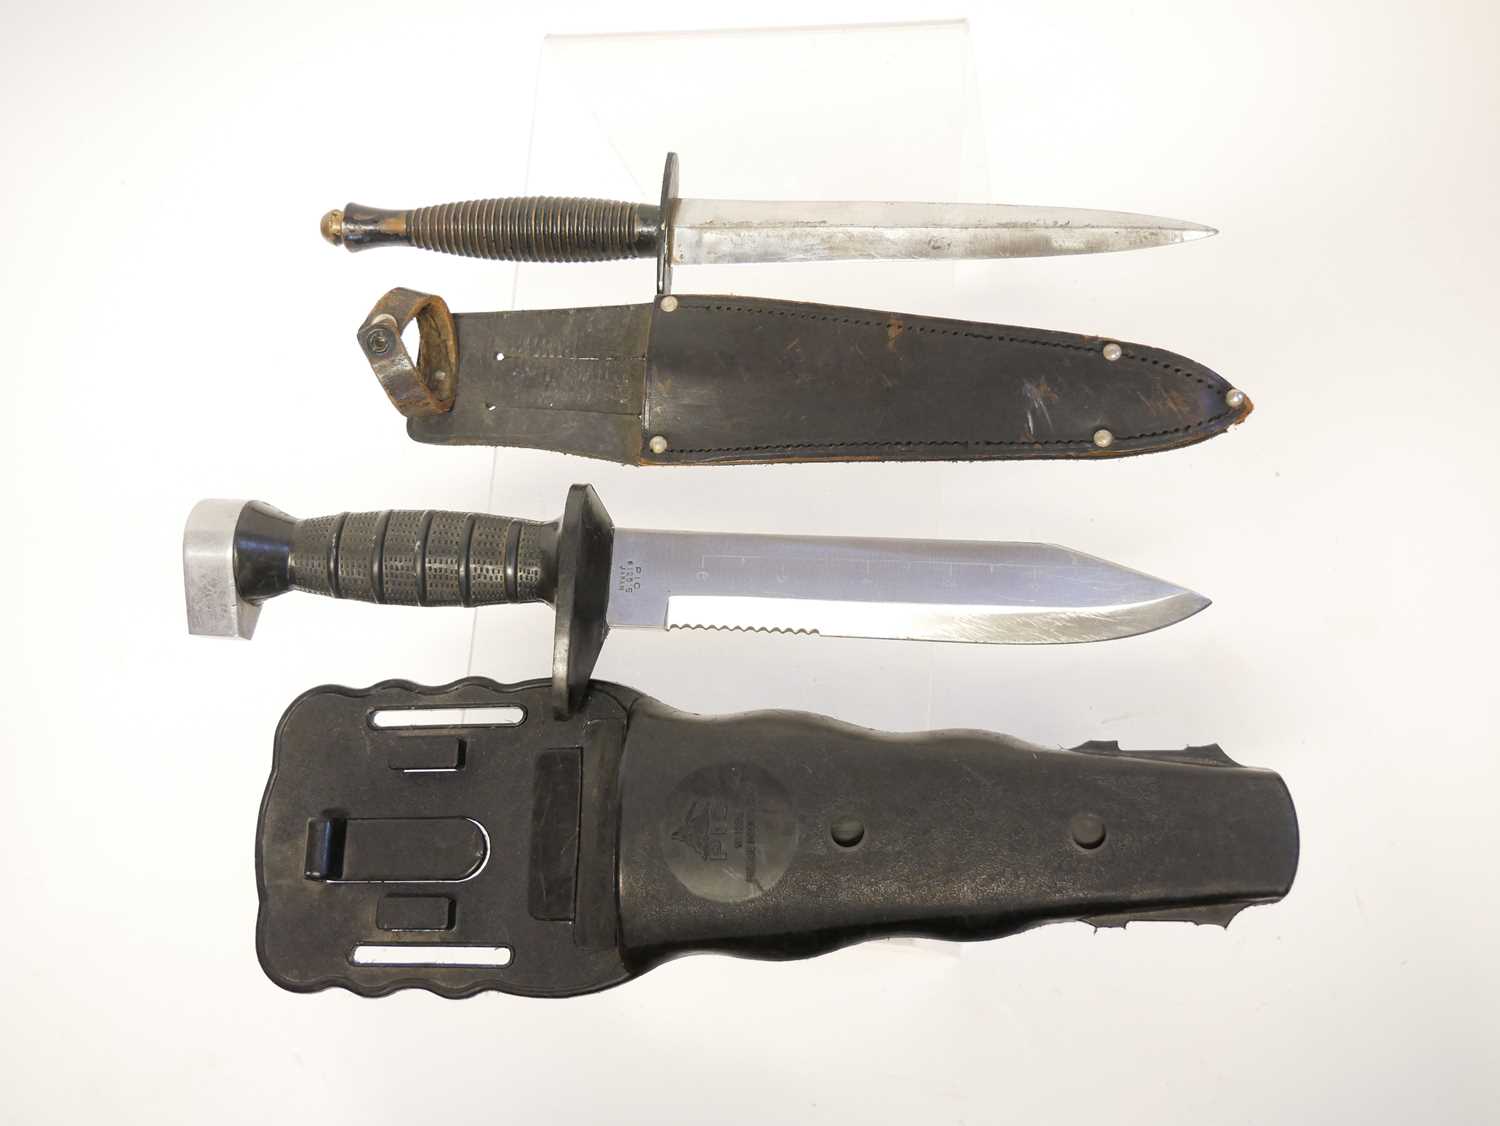 Fairbairn Sykes dagger and scabbard, completely unmarked, also a PIC Diver's Knife and plastic - Image 2 of 7